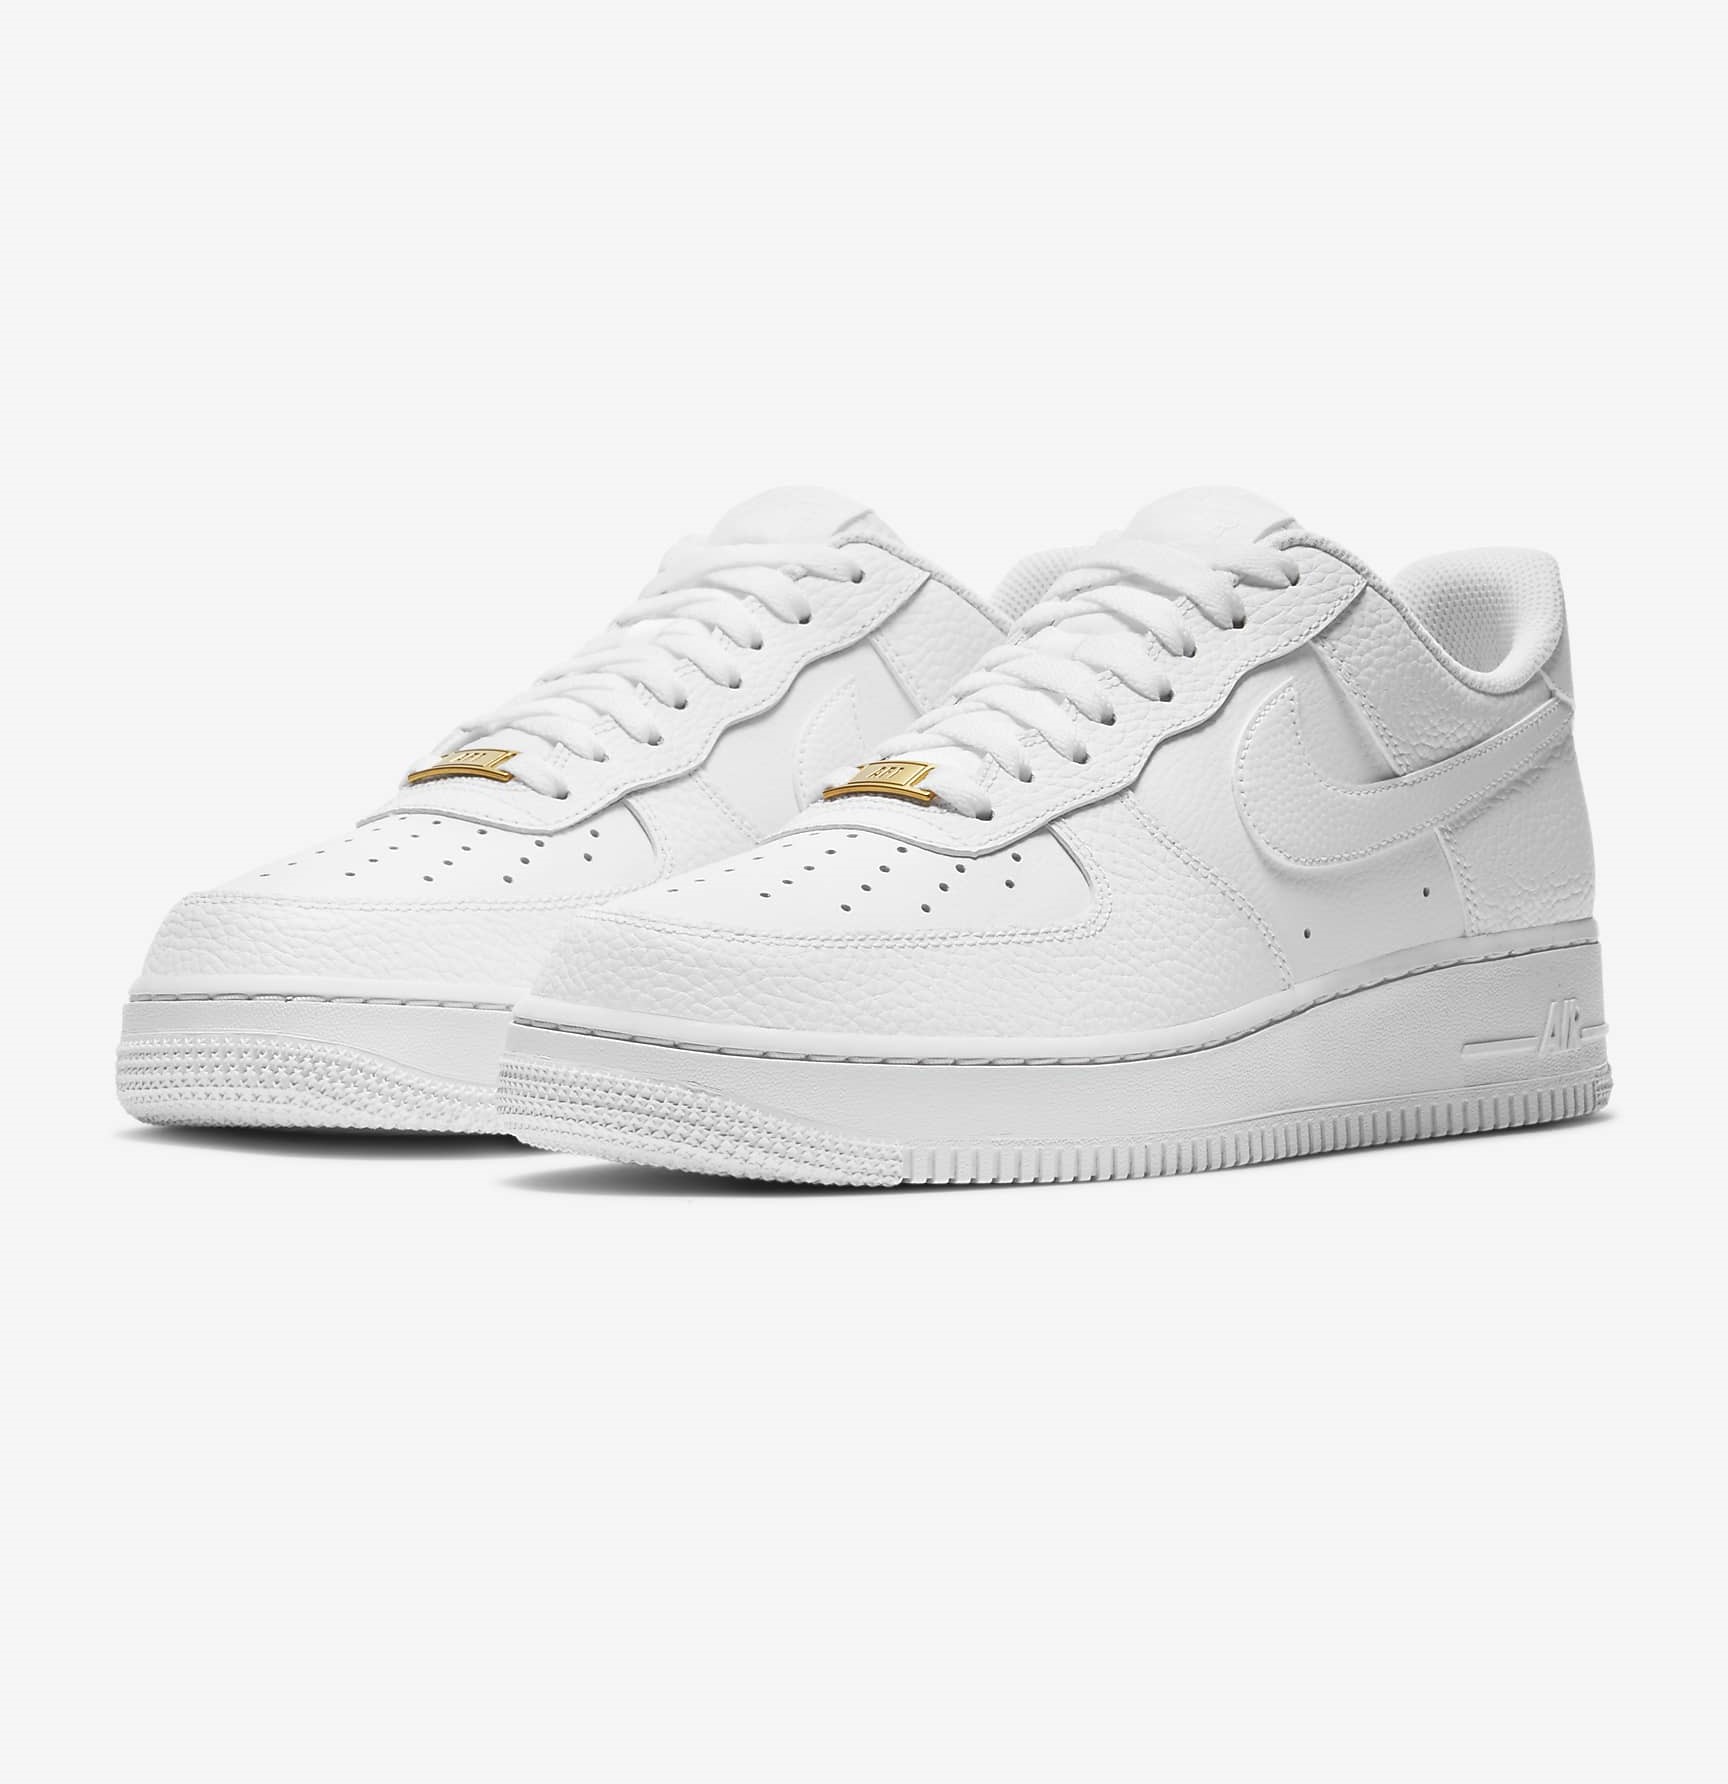 Nike Gives All-White Air Force 1 Low An Elegant Upgrade - Maxim